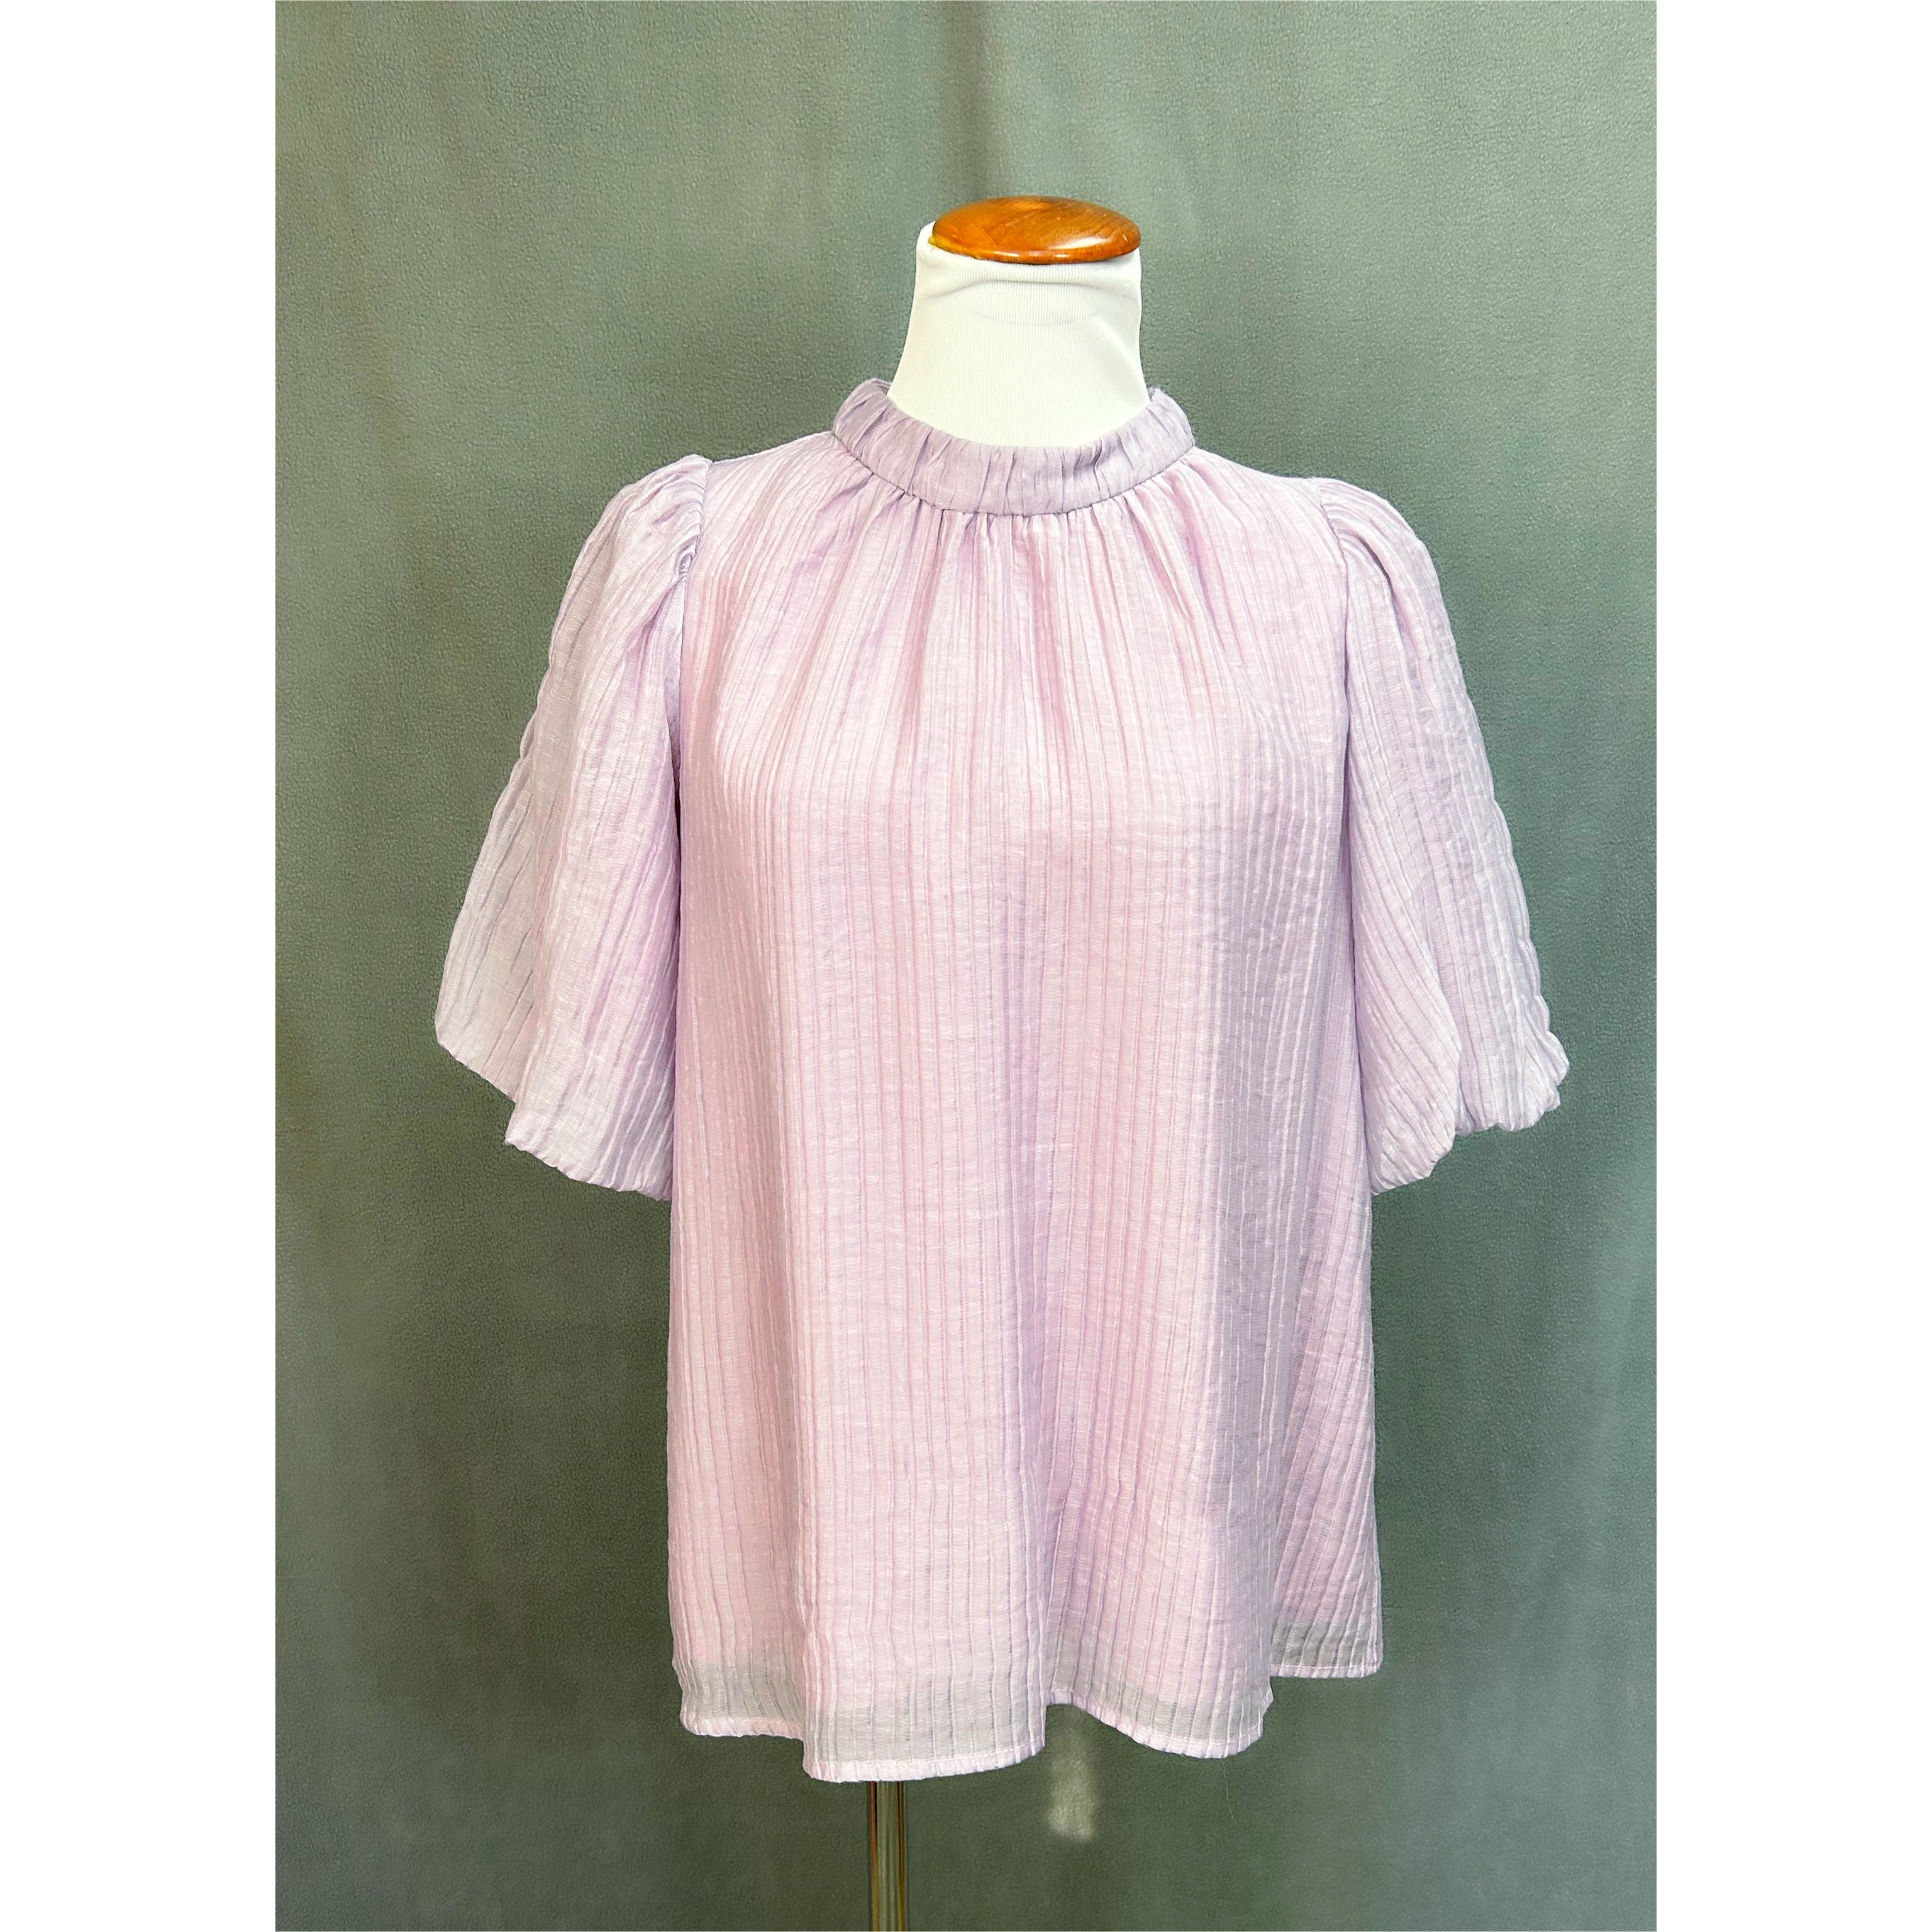 Jade lavender blouse, size S, NEW WITH TAGS!